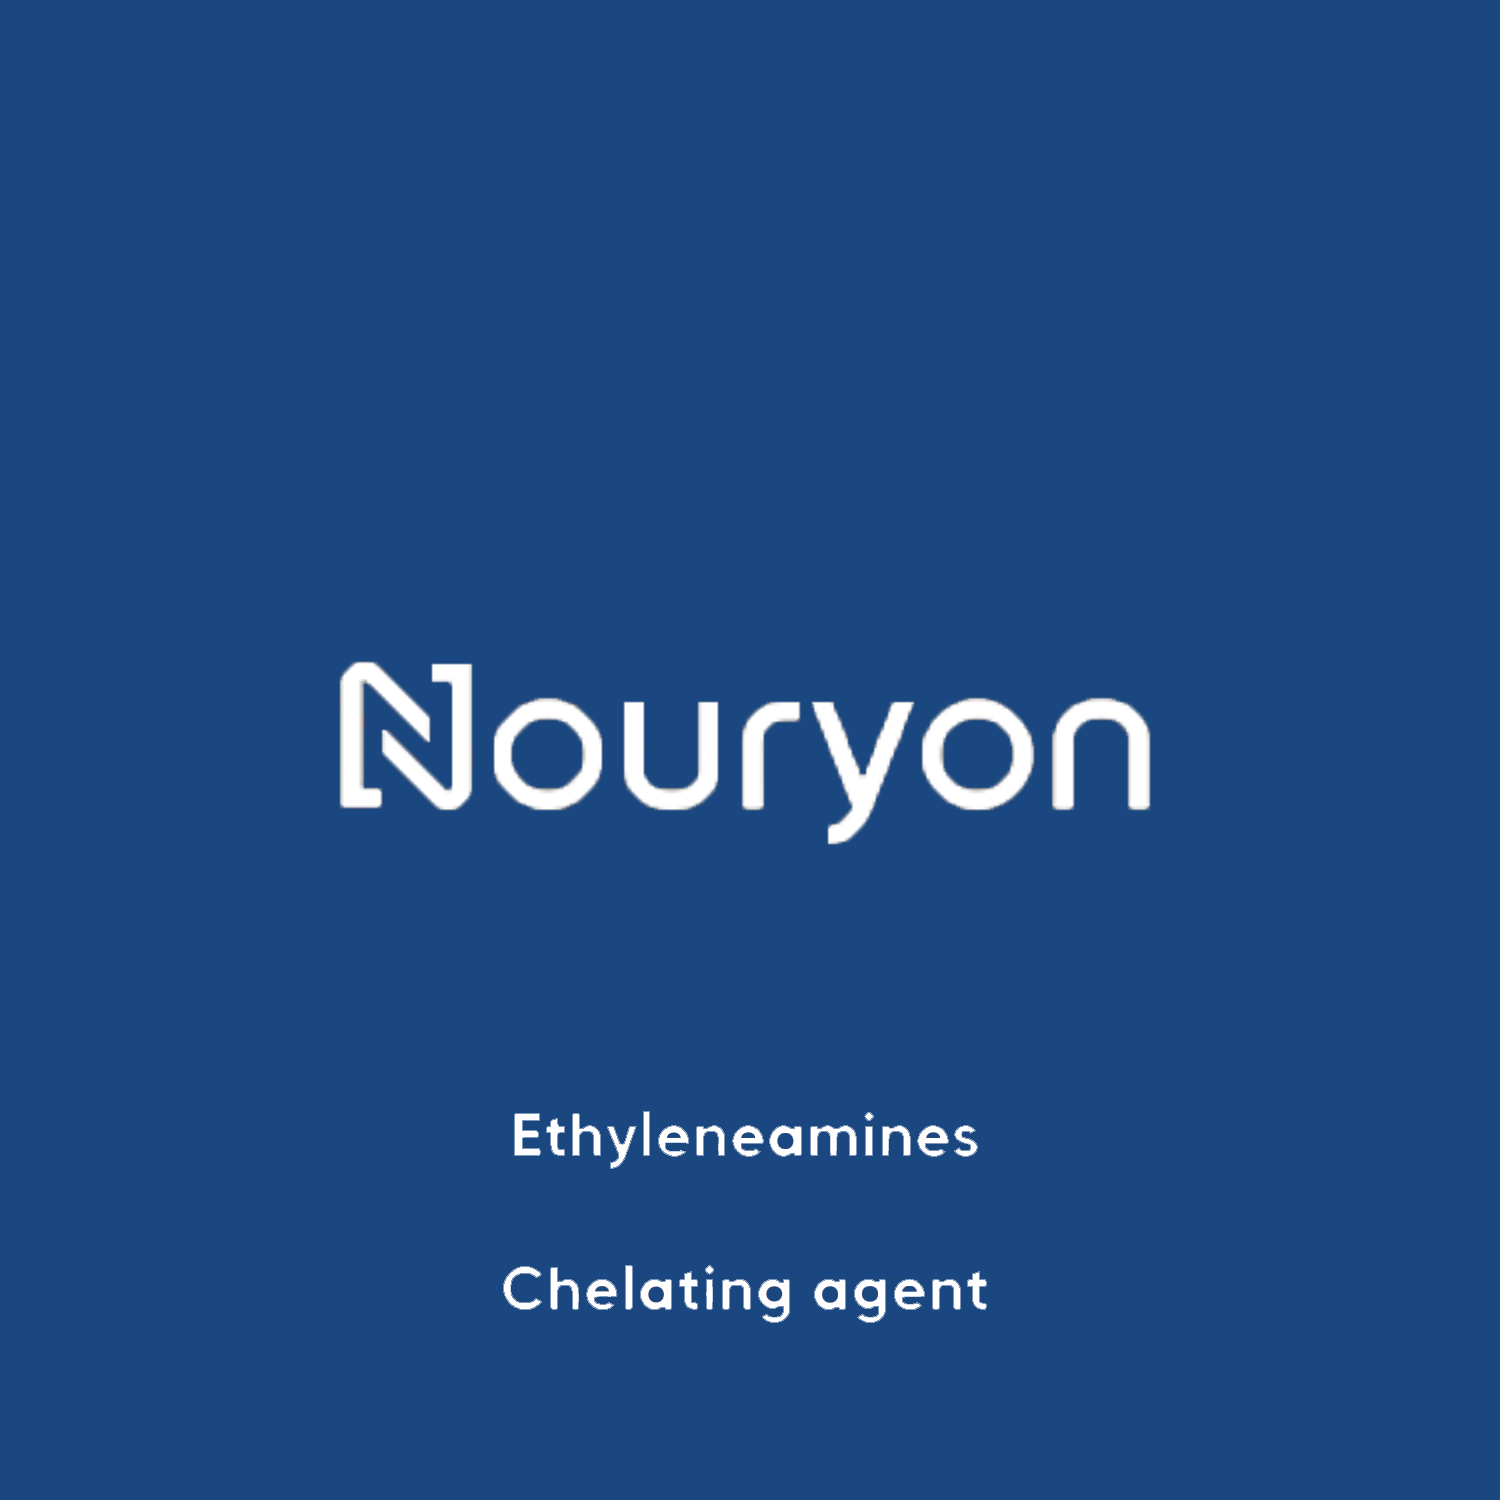 Nouryon Ethyleamines, Chelating agent